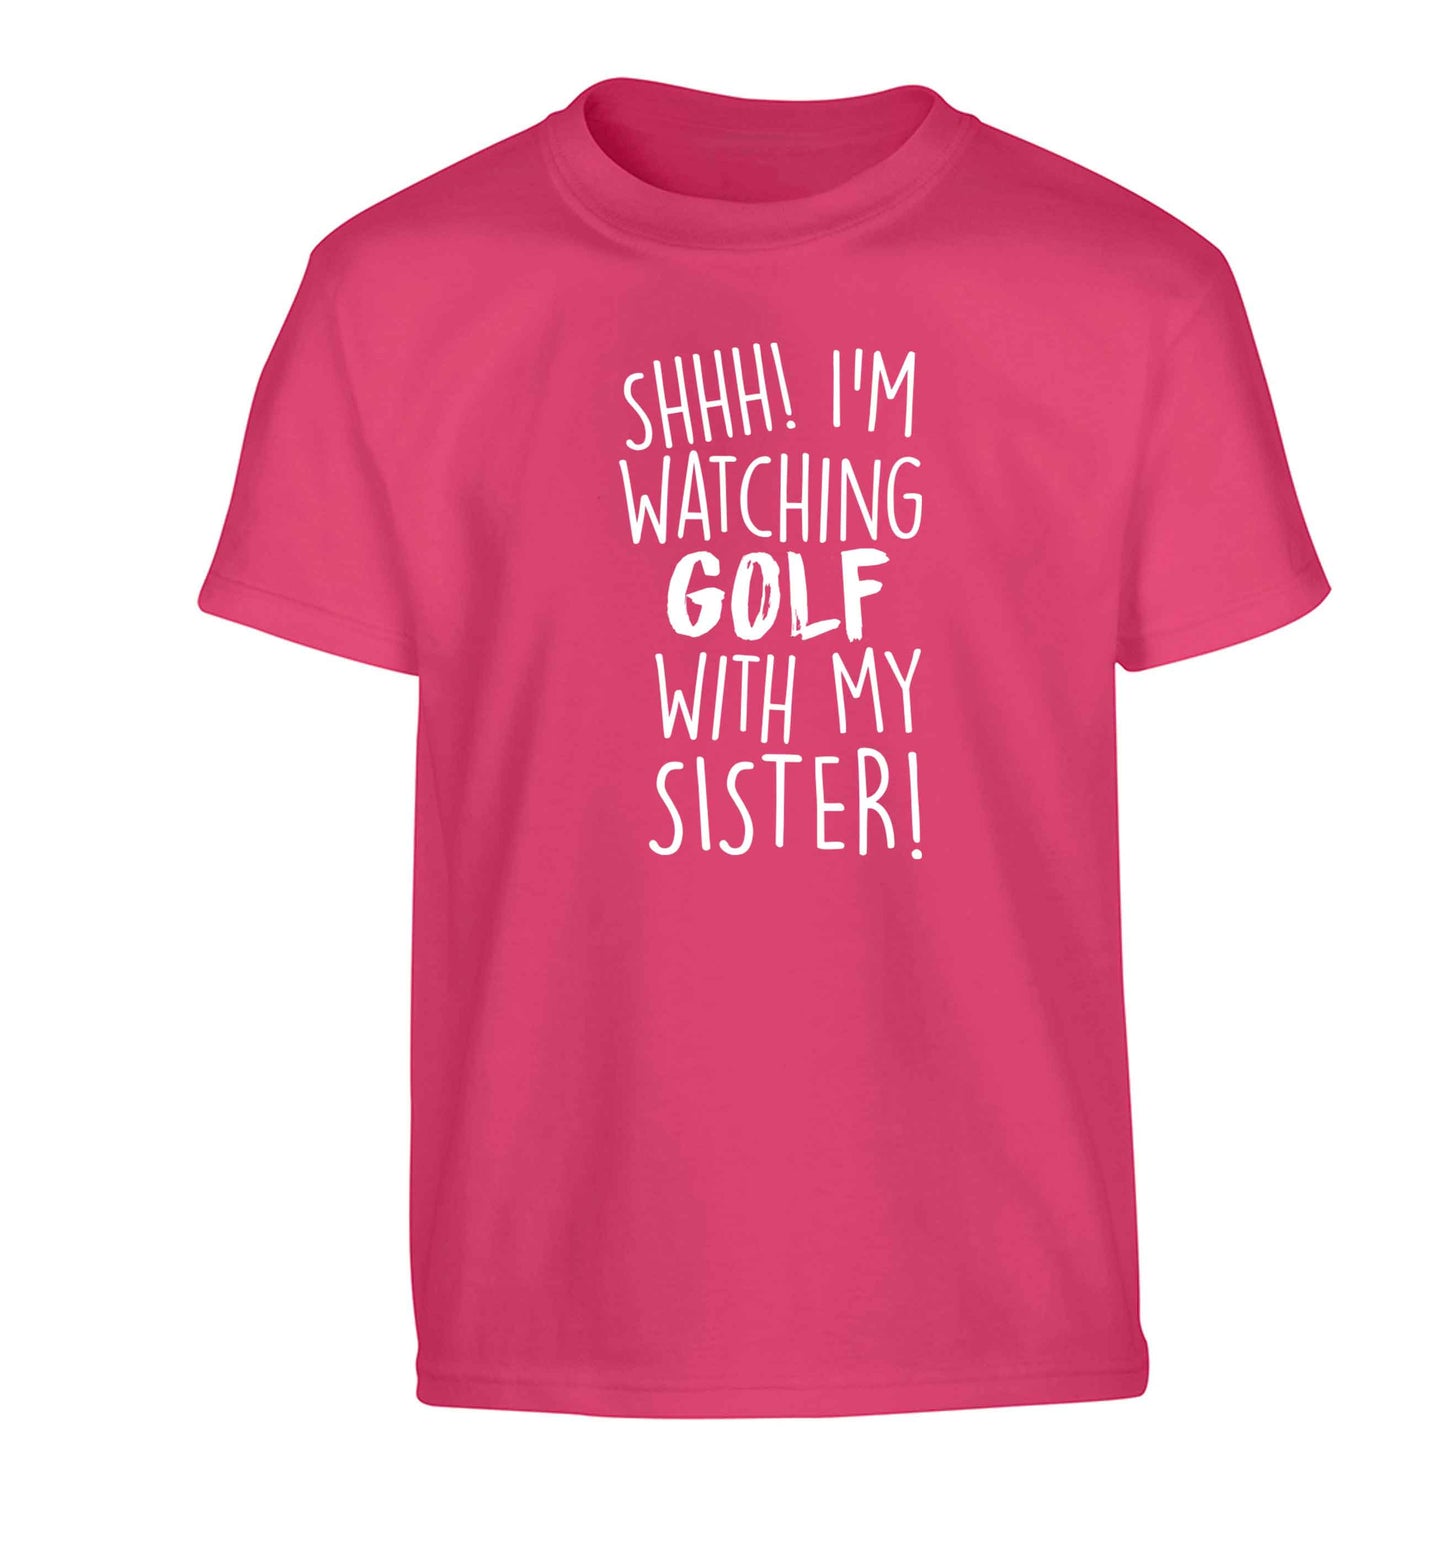 Shh I'm watching golf with my sister Children's pink Tshirt 12-13 Years